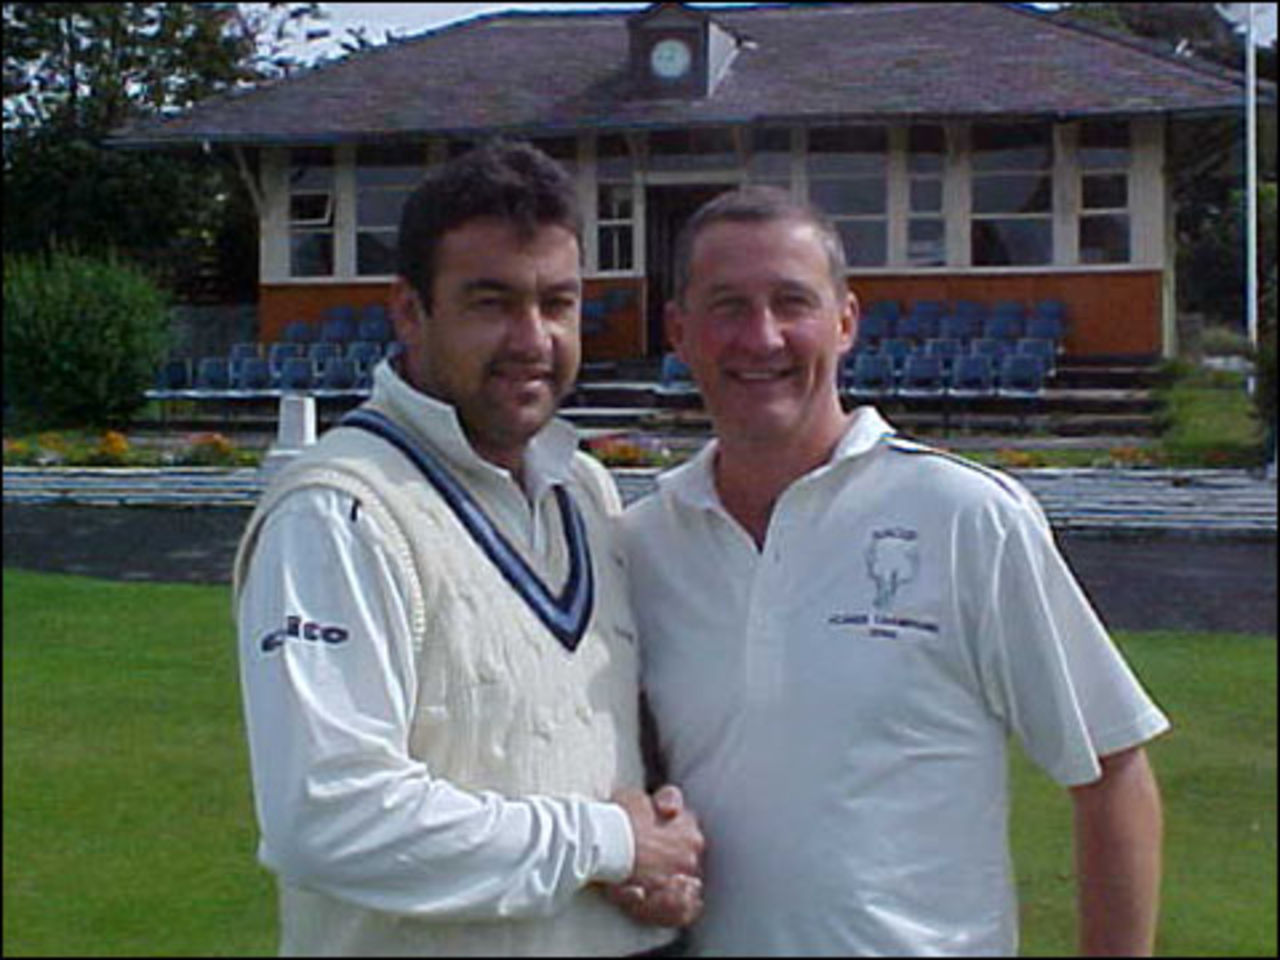 The end of an era at Bacup as professional Shaun Young and captain Neal Wilkinson play their final Lancashire League match at Lanehead.